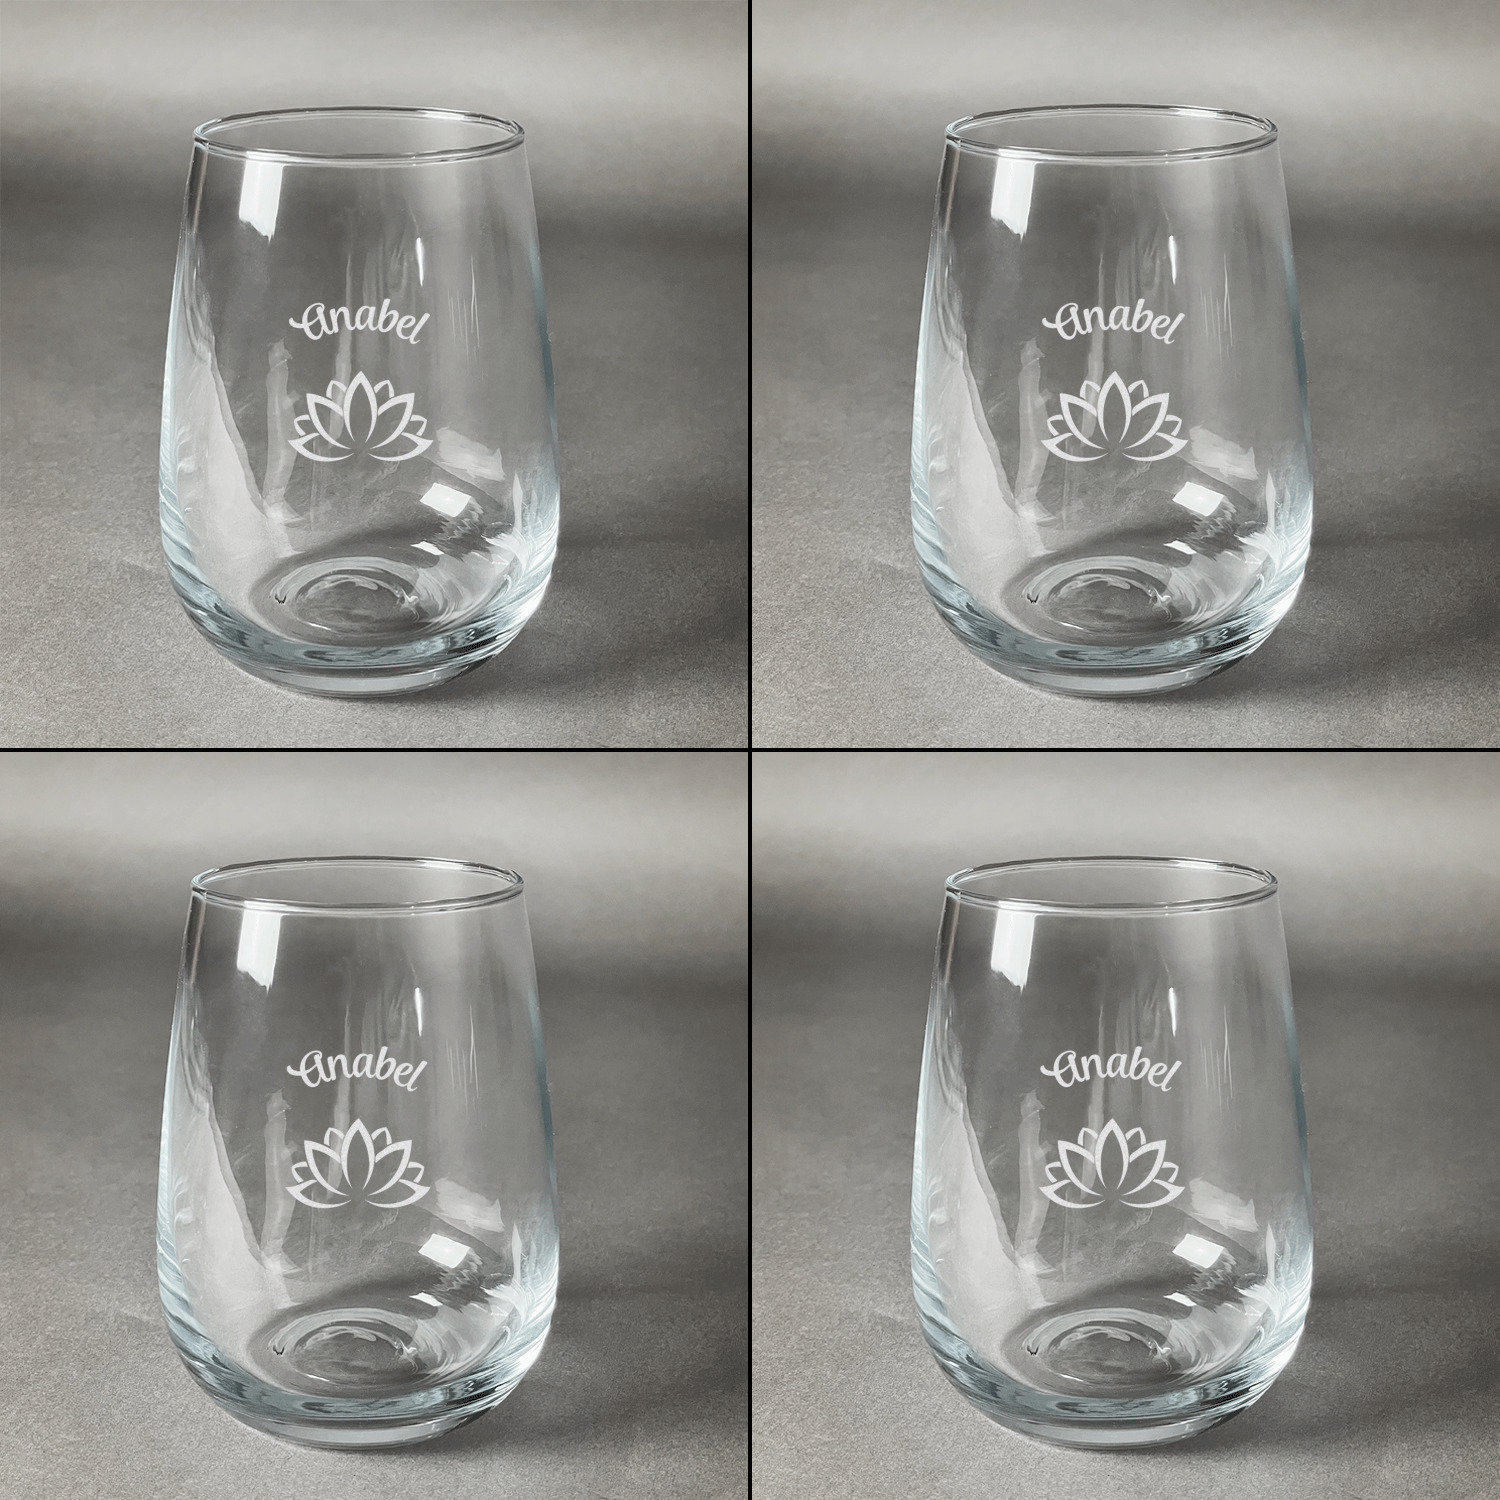 https://www.youcustomizeit.com/common/MAKE/177890/Lotus-Flower-Set-of-Four-Personalized-Stemless-Wineglasses-Approval.jpg?lm=1682543966